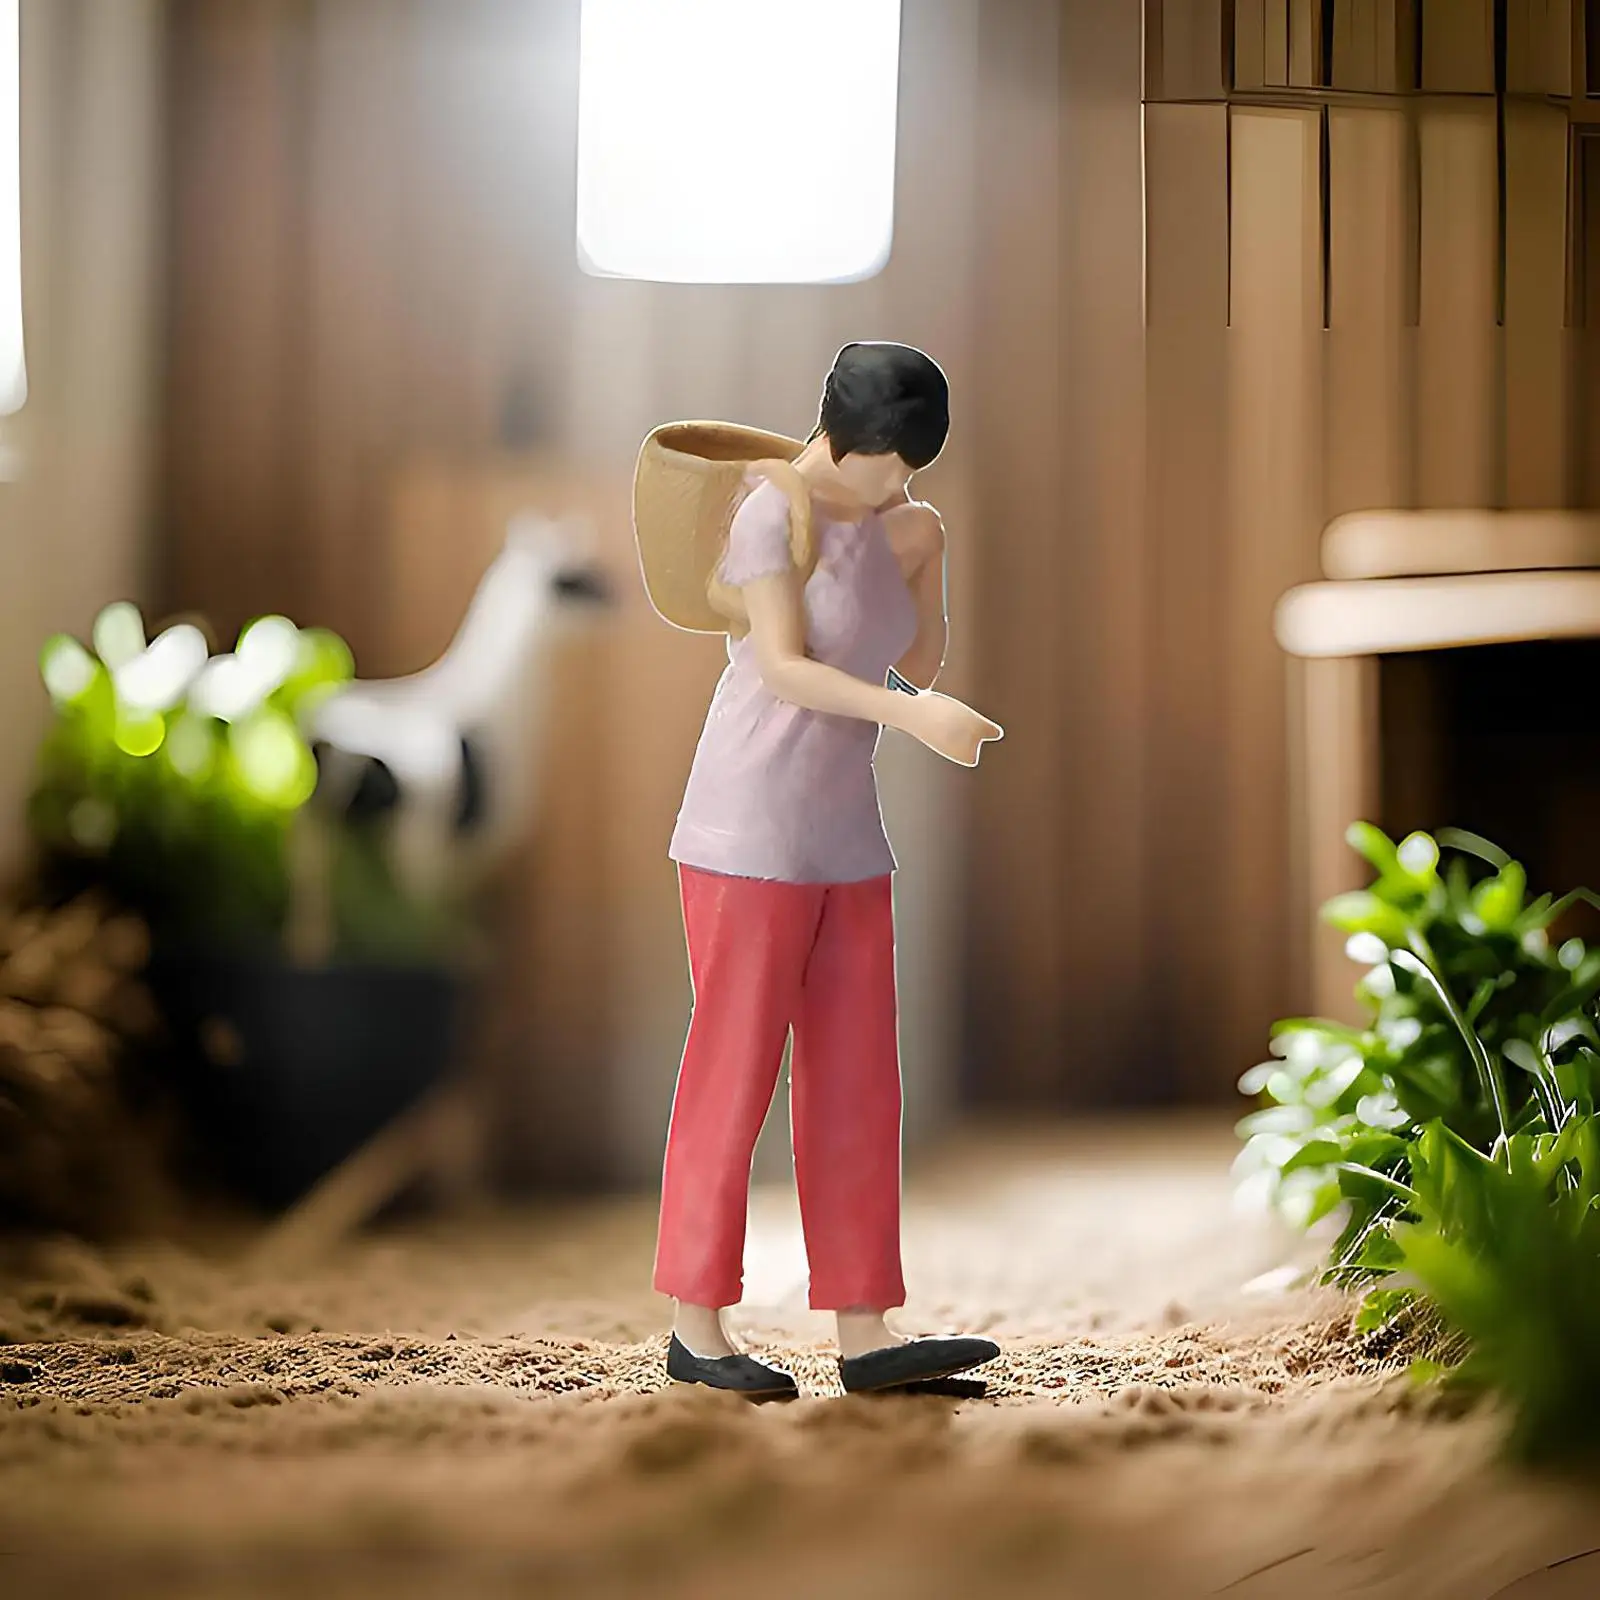 1:64 People Figures Train Park Street People Figures Crafts Resin for Diorama Dollhouse DIY Scene Photography Props Decoration